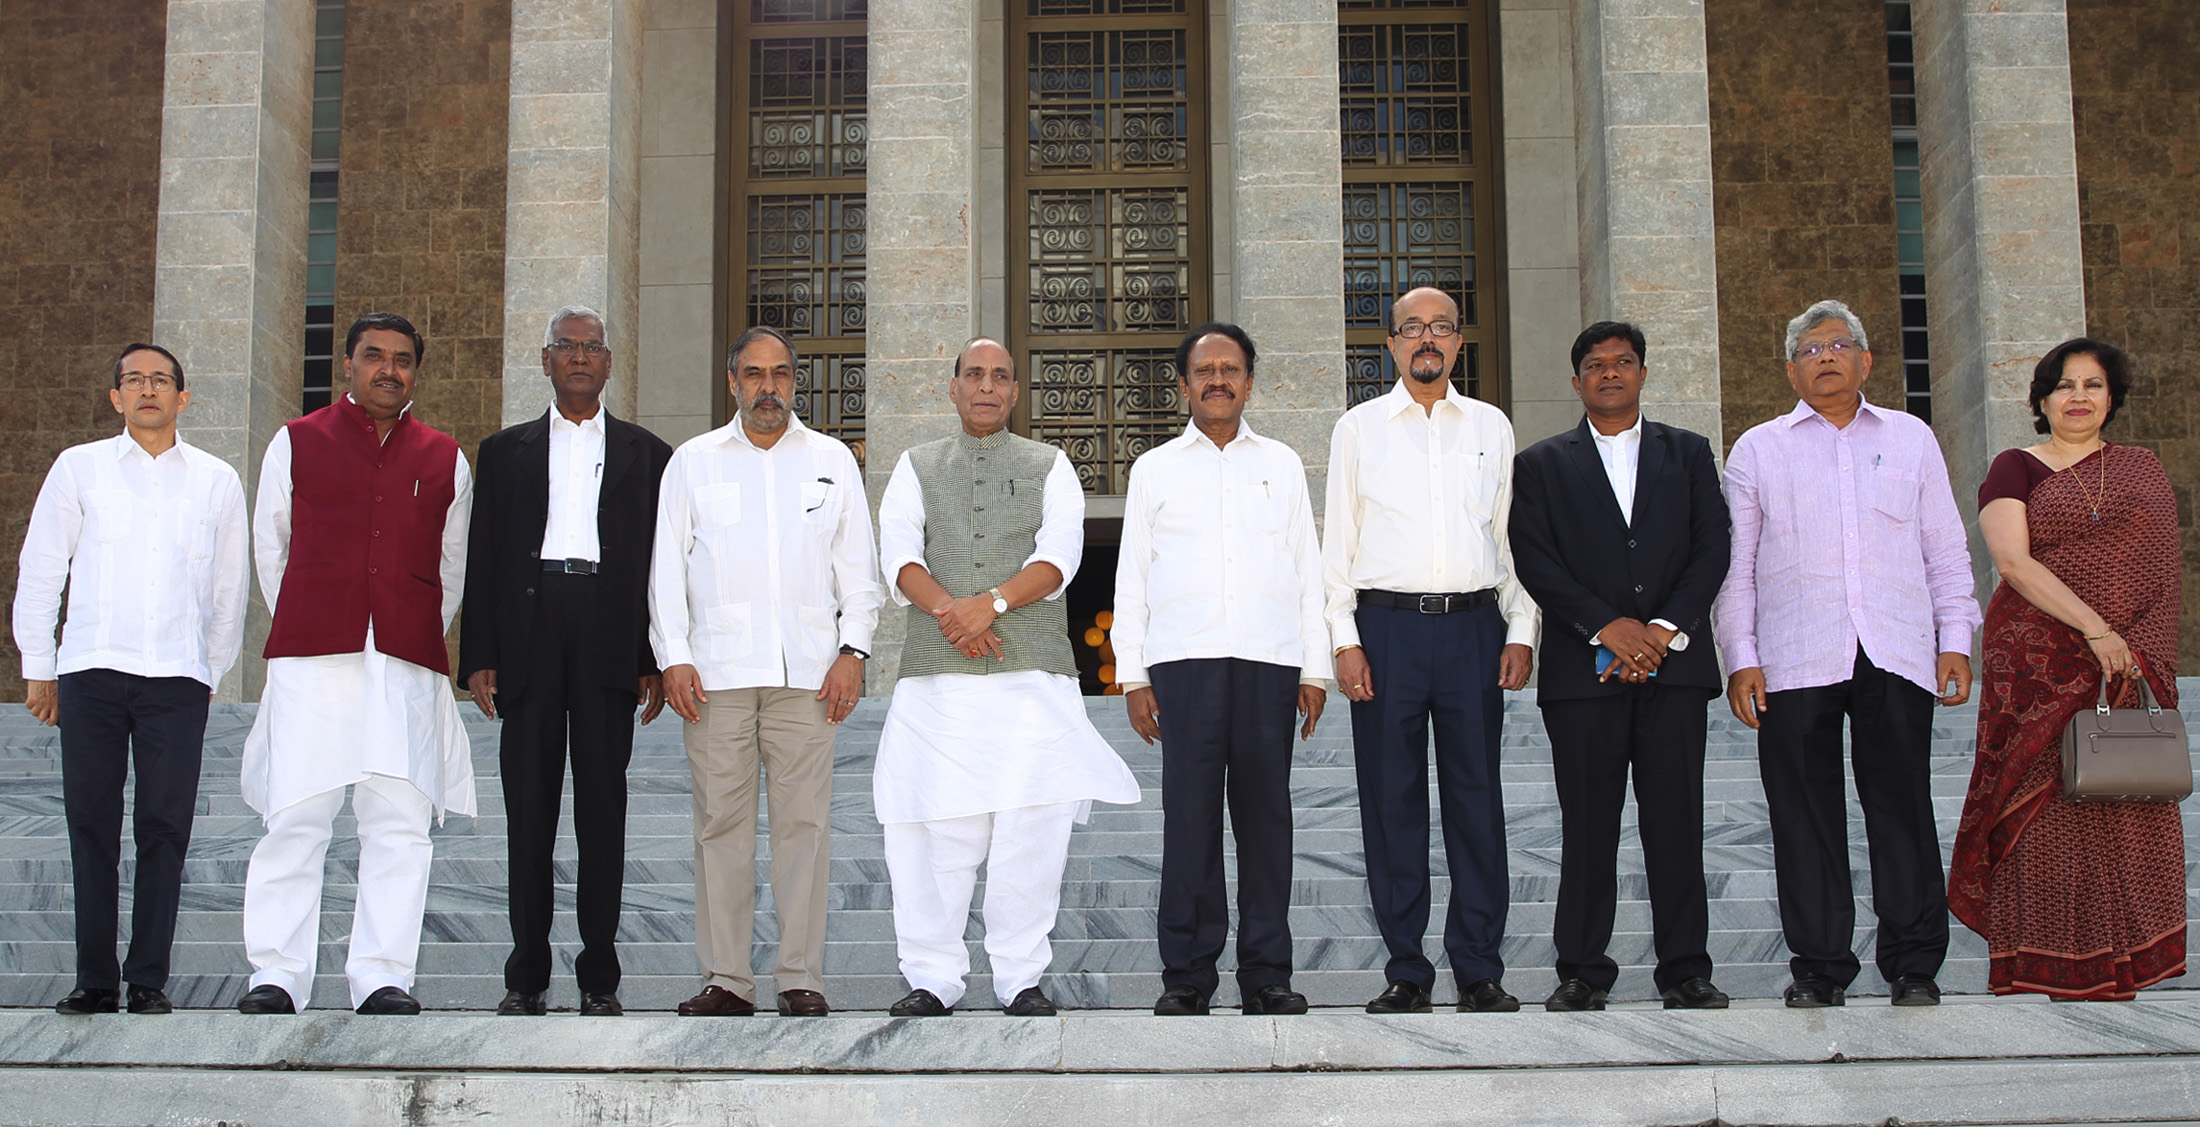 The parliamentary delegation led by the Union Home Minister, Shri Rajnath Singh, at the Jose Marti Revolution Square, in Havana on November 30, 2016.